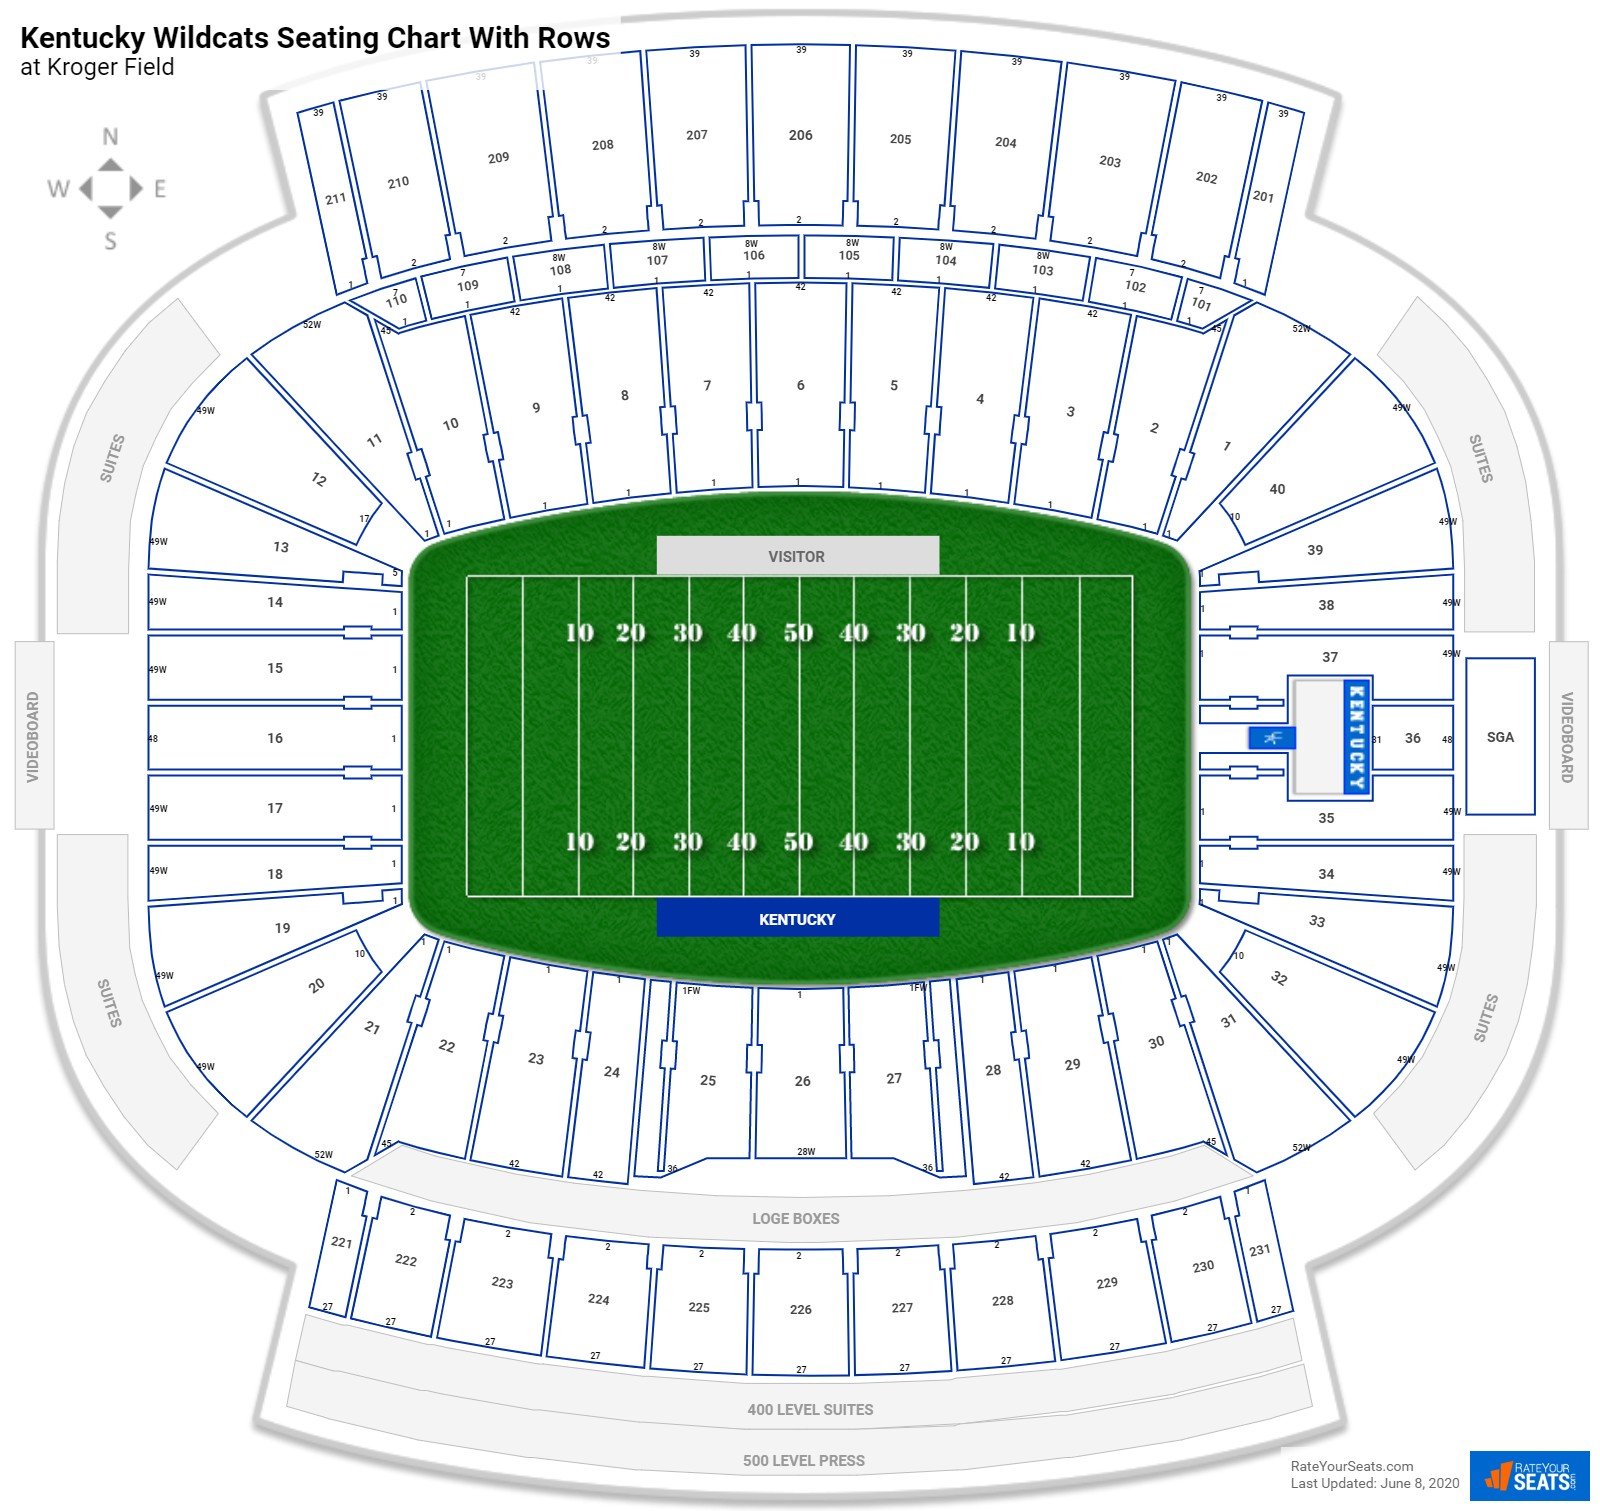 Kroger Field seating chart with row numbers